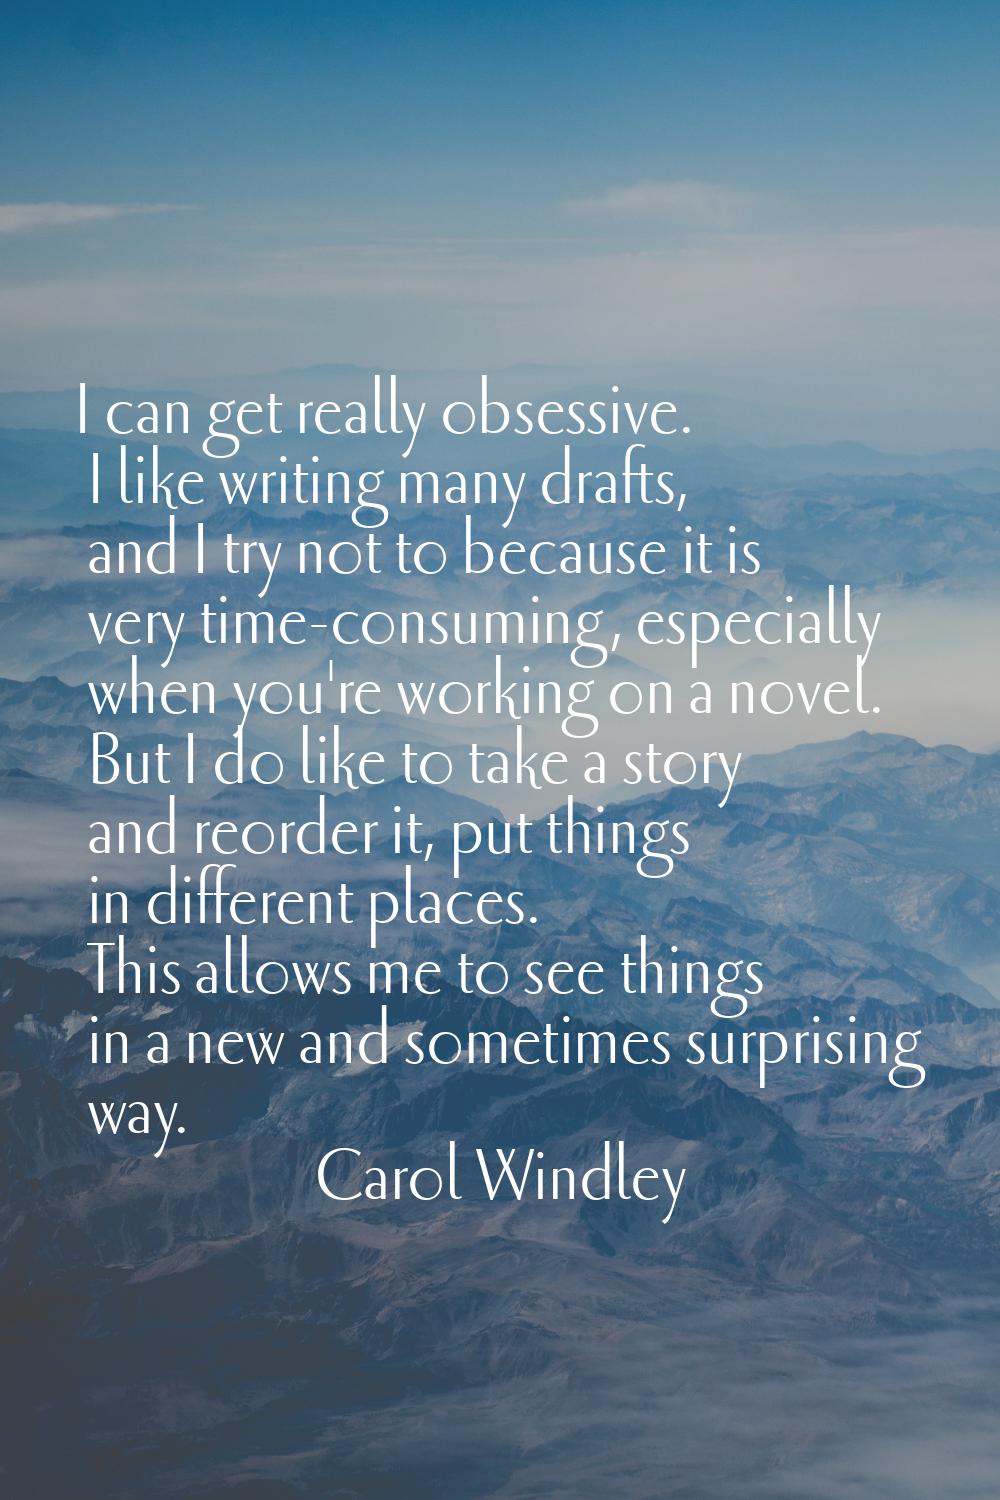 I can get really obsessive. I like writing many drafts, and I try not to because it is very time-co